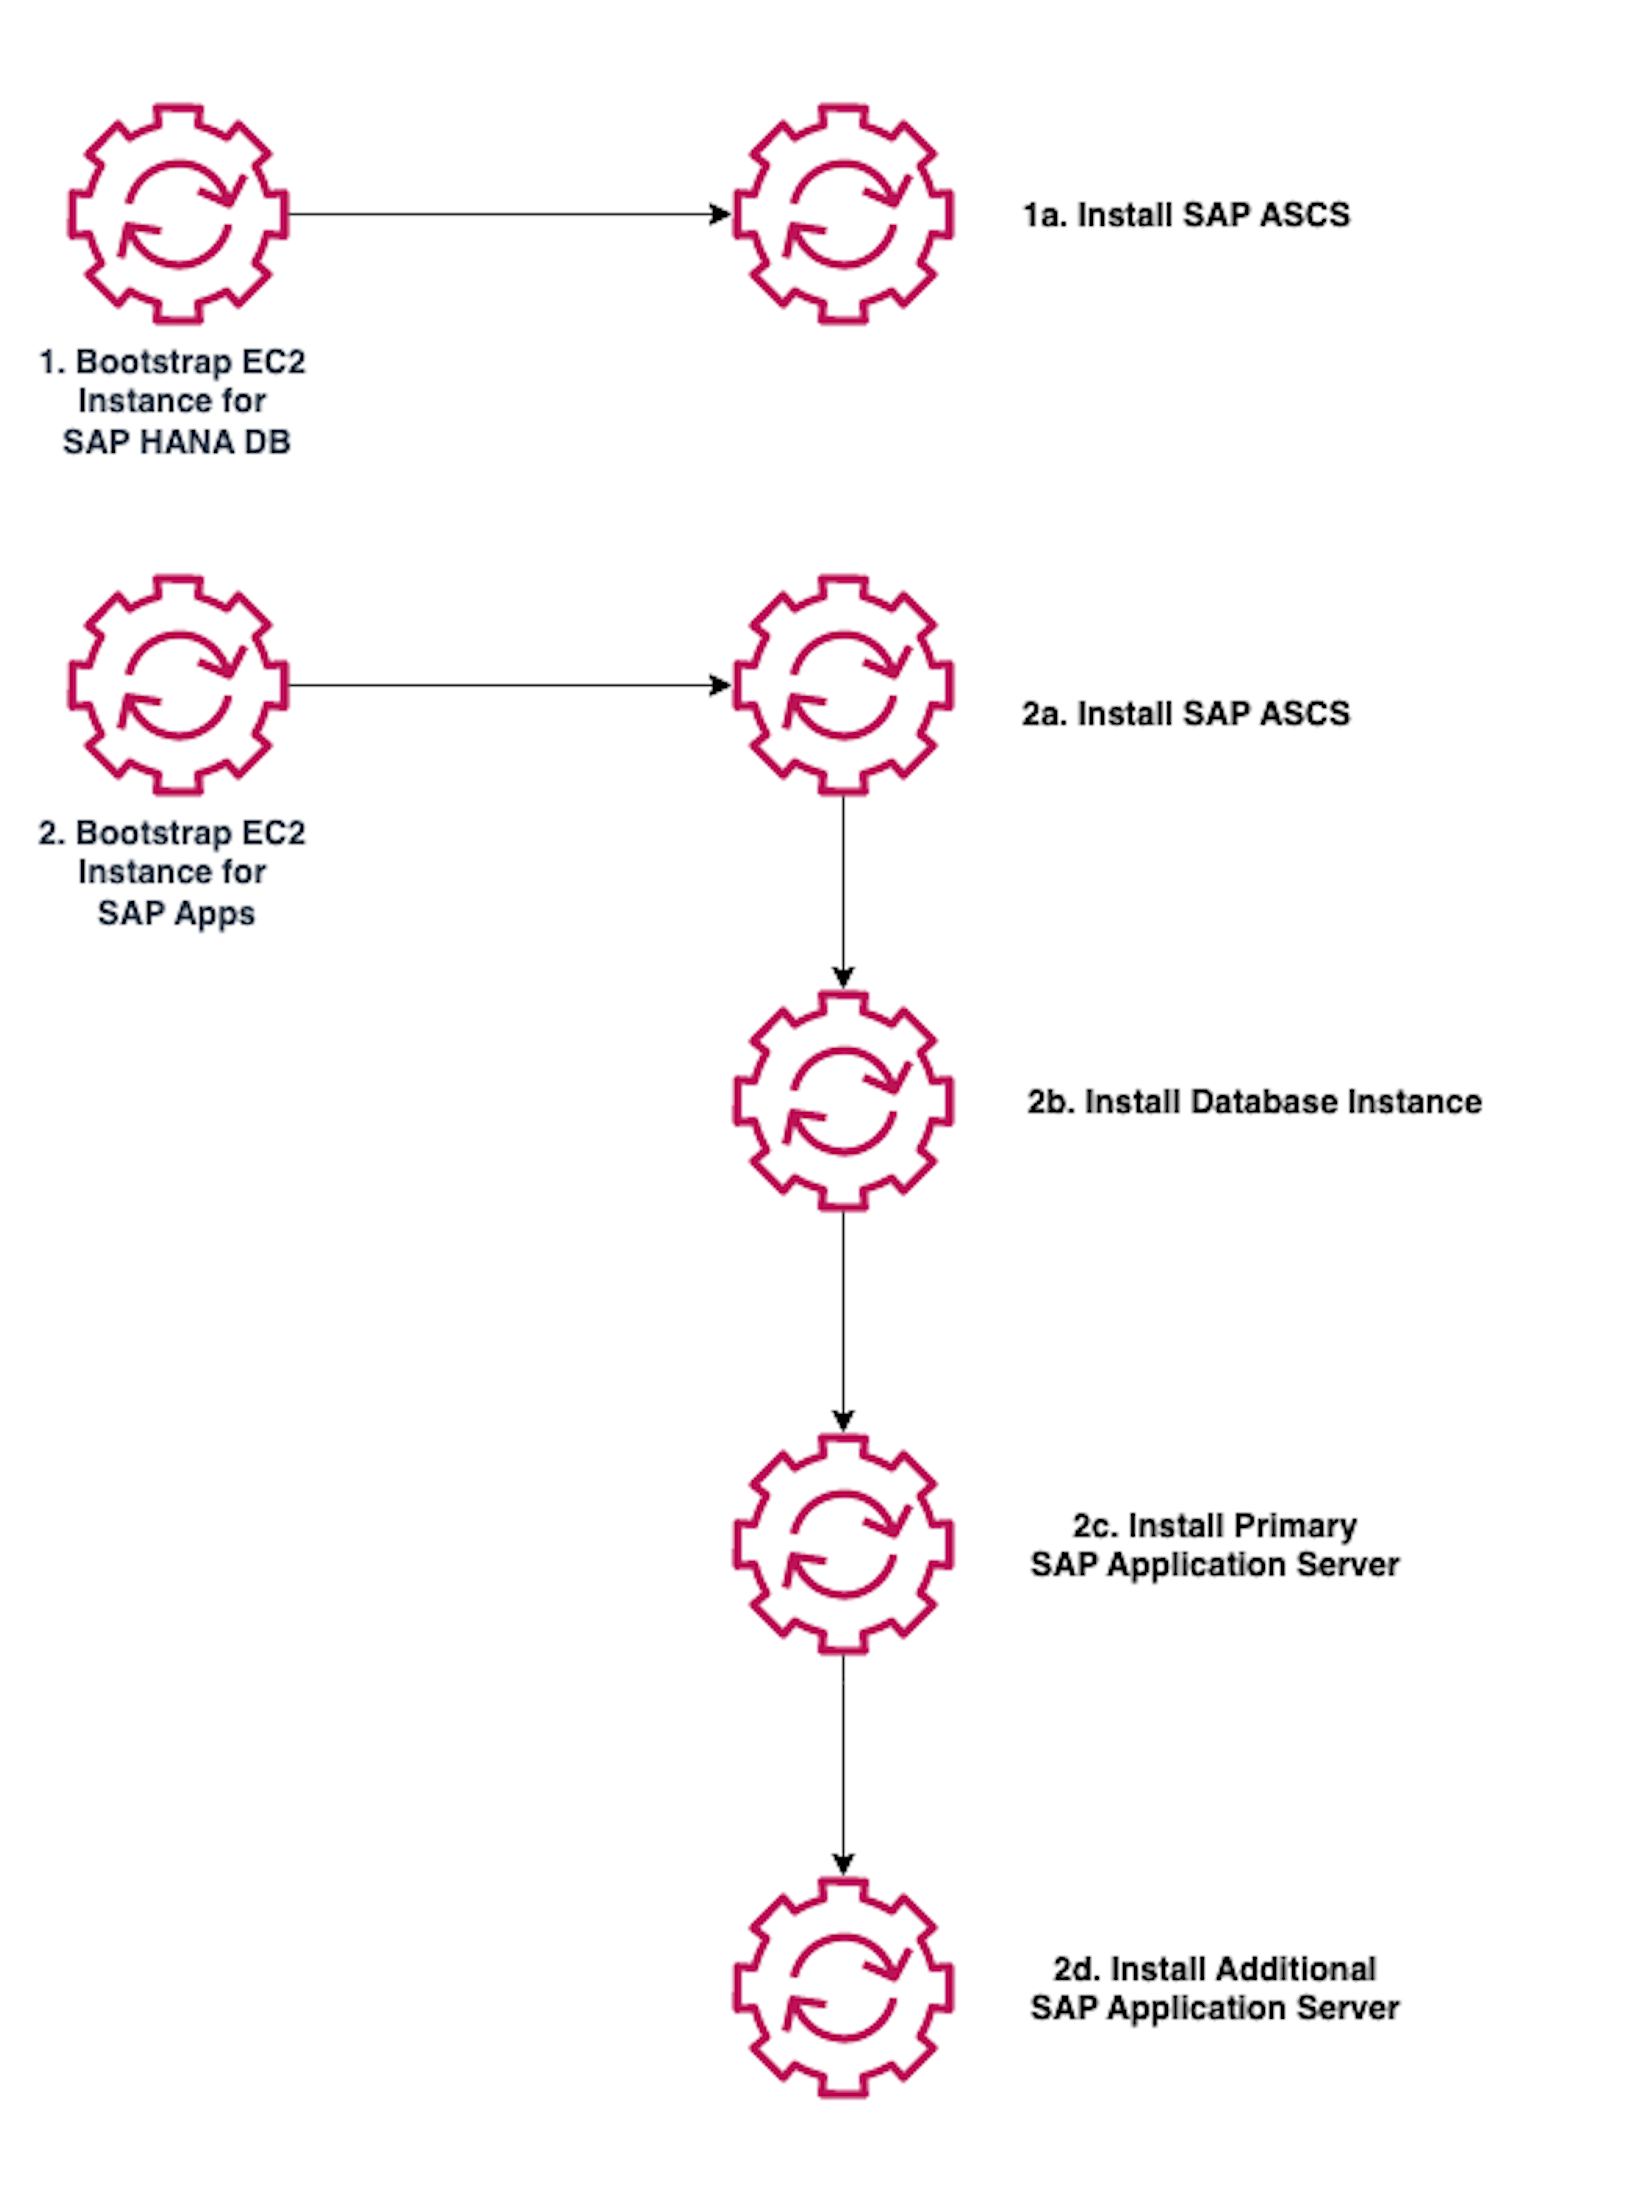 
                    Detailed flow chart of the SSM document.
                